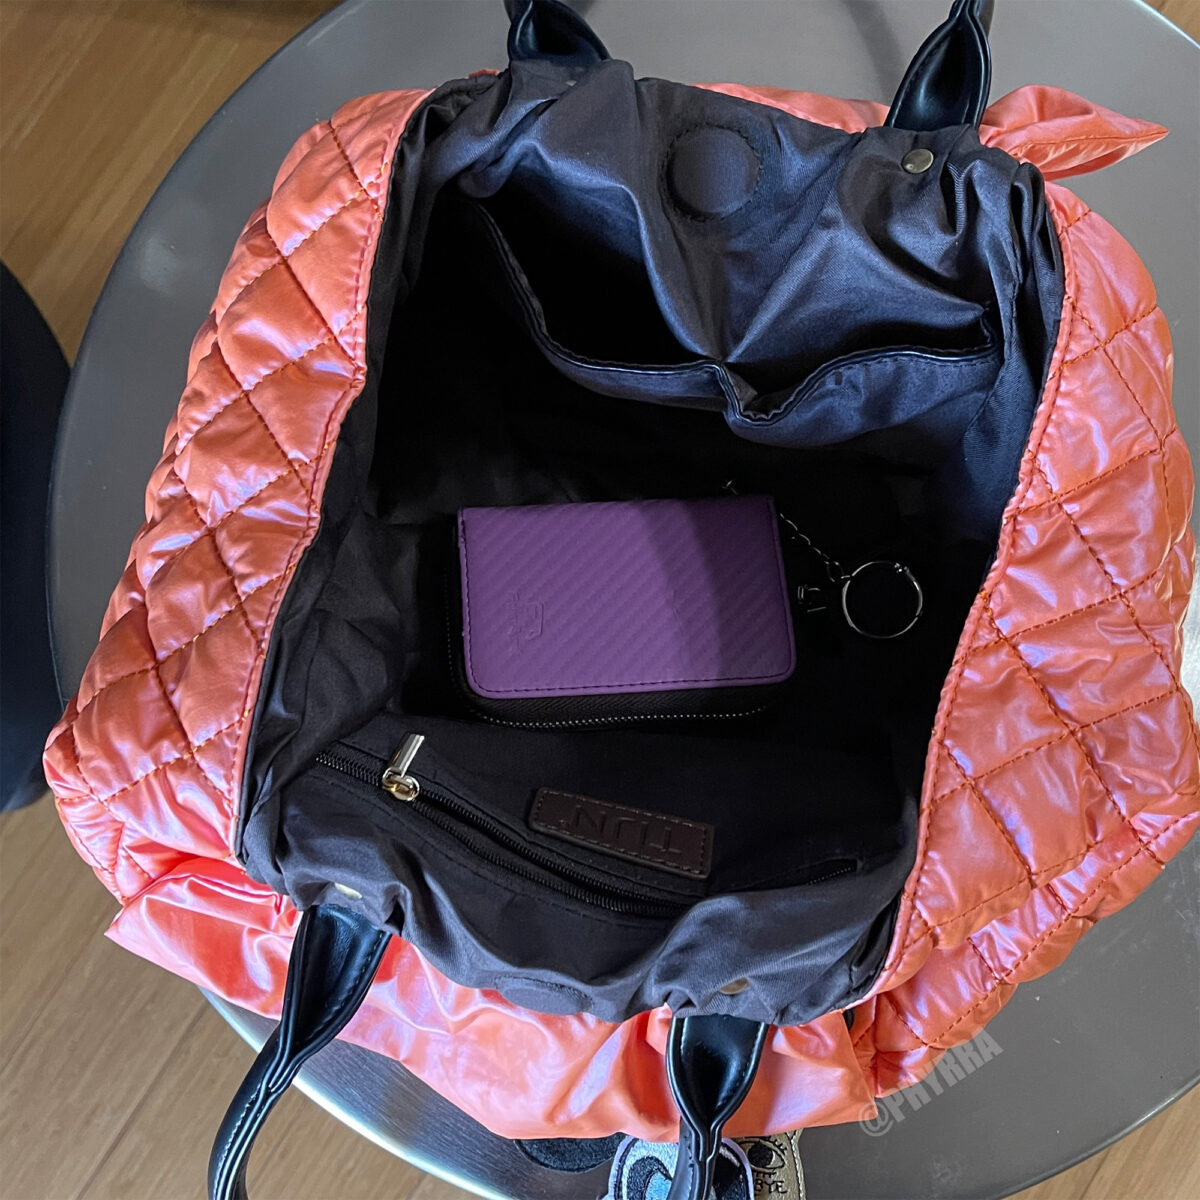 Inside the TIJN Harlow Bag that reminds me of pumpkin taffy